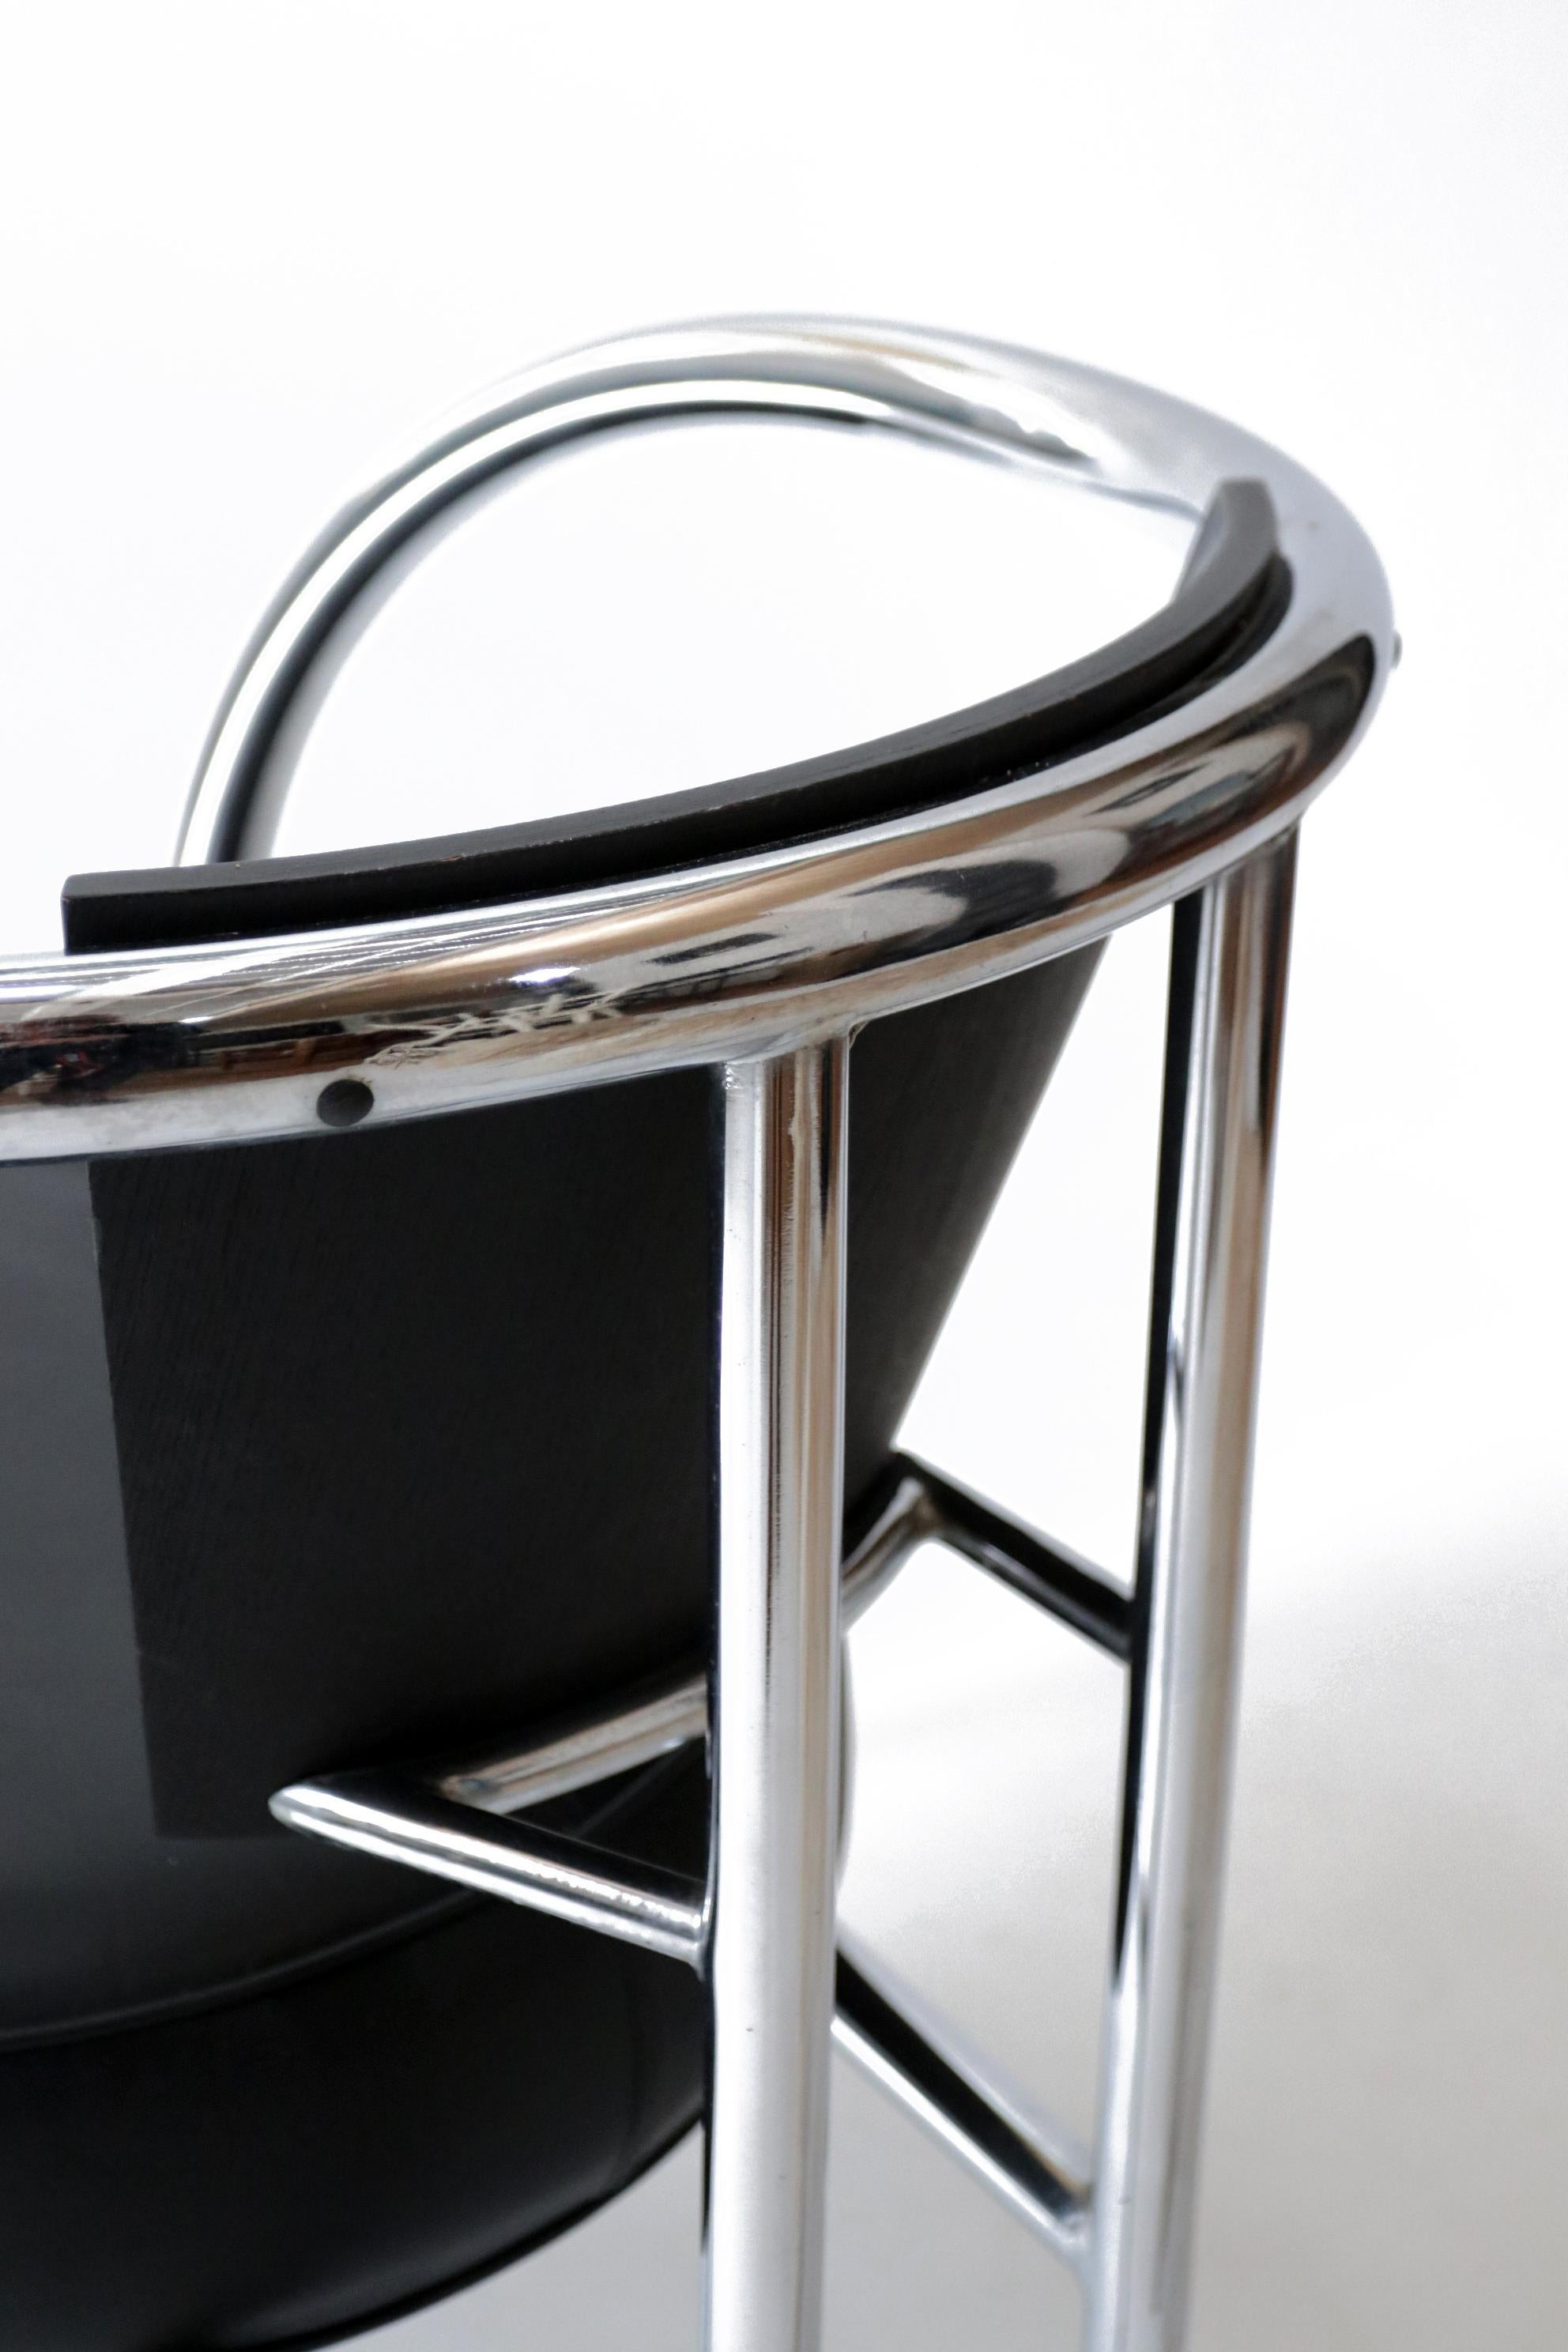 Beautiful 1980s design armchair made of thick chromed tubular frame, black leather seat and curved wooden back. 
Most likely made in Italy.